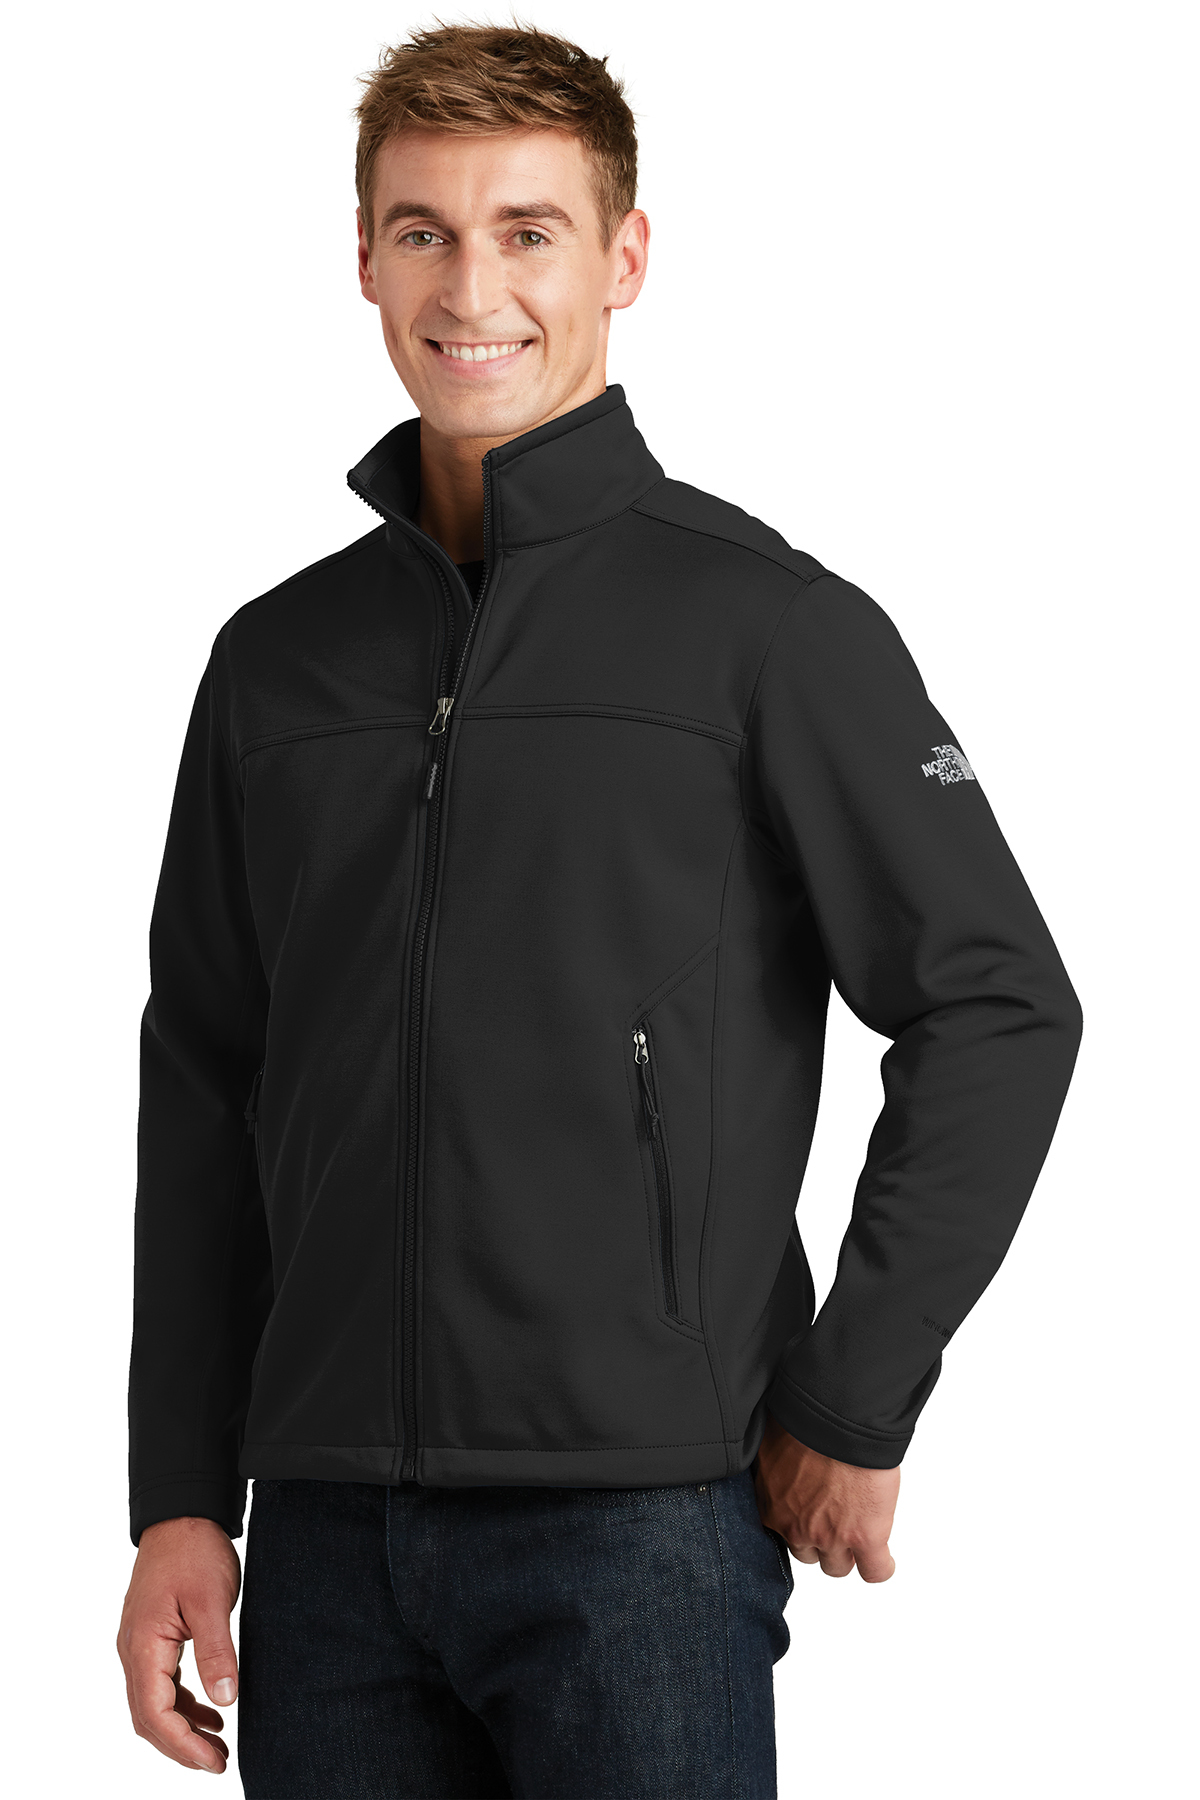 the north face extent ii shell jacket